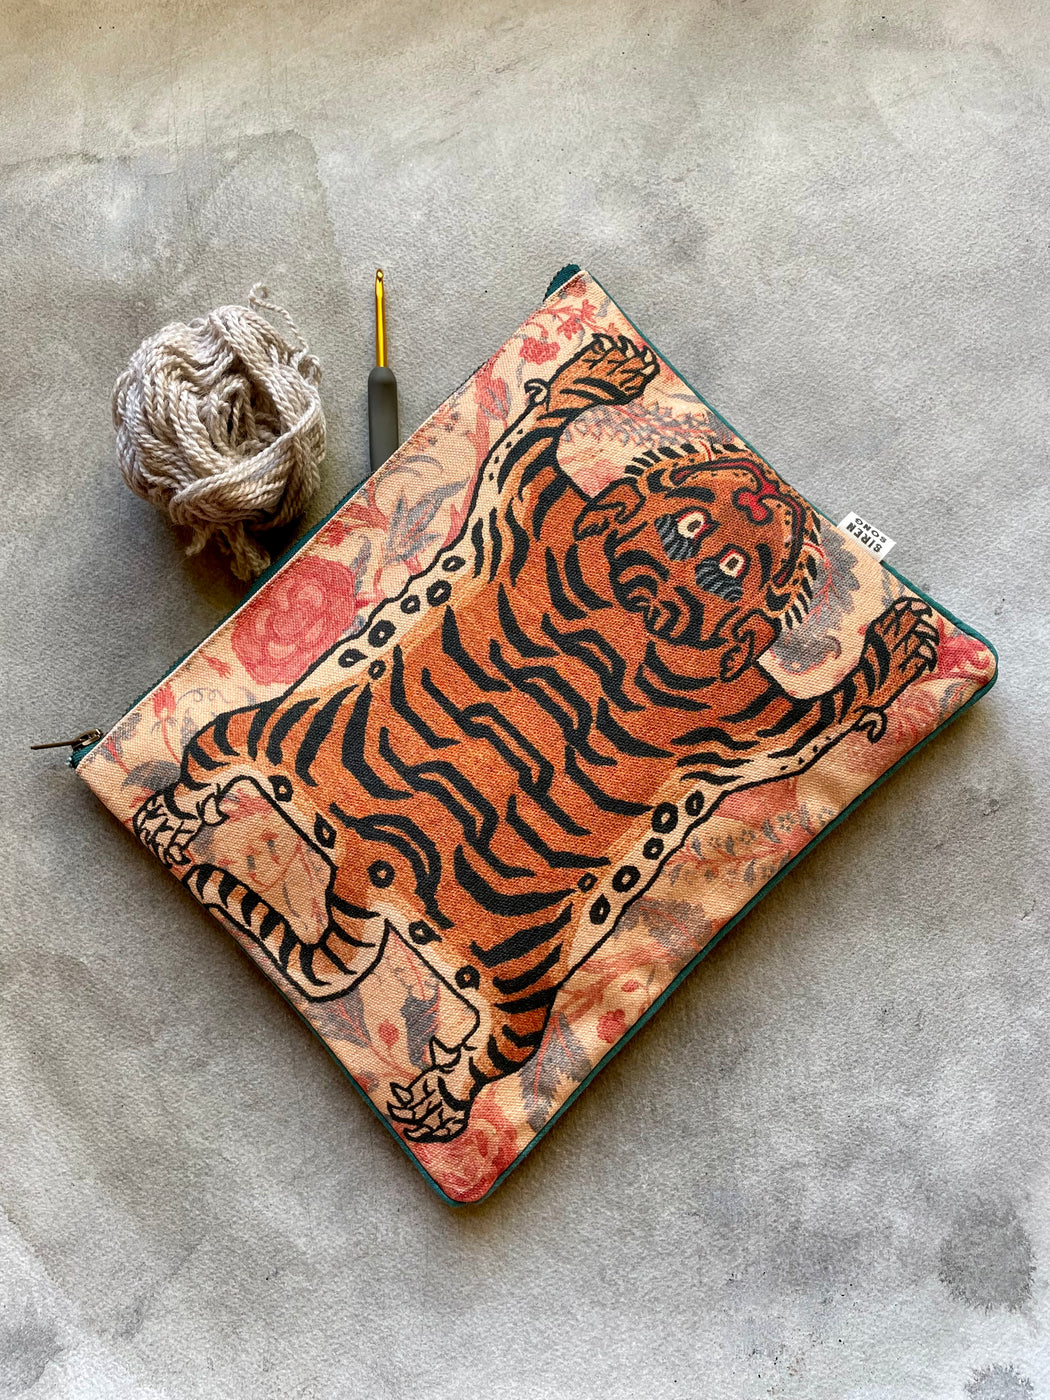 "Tiger" Pouch by Siren Song